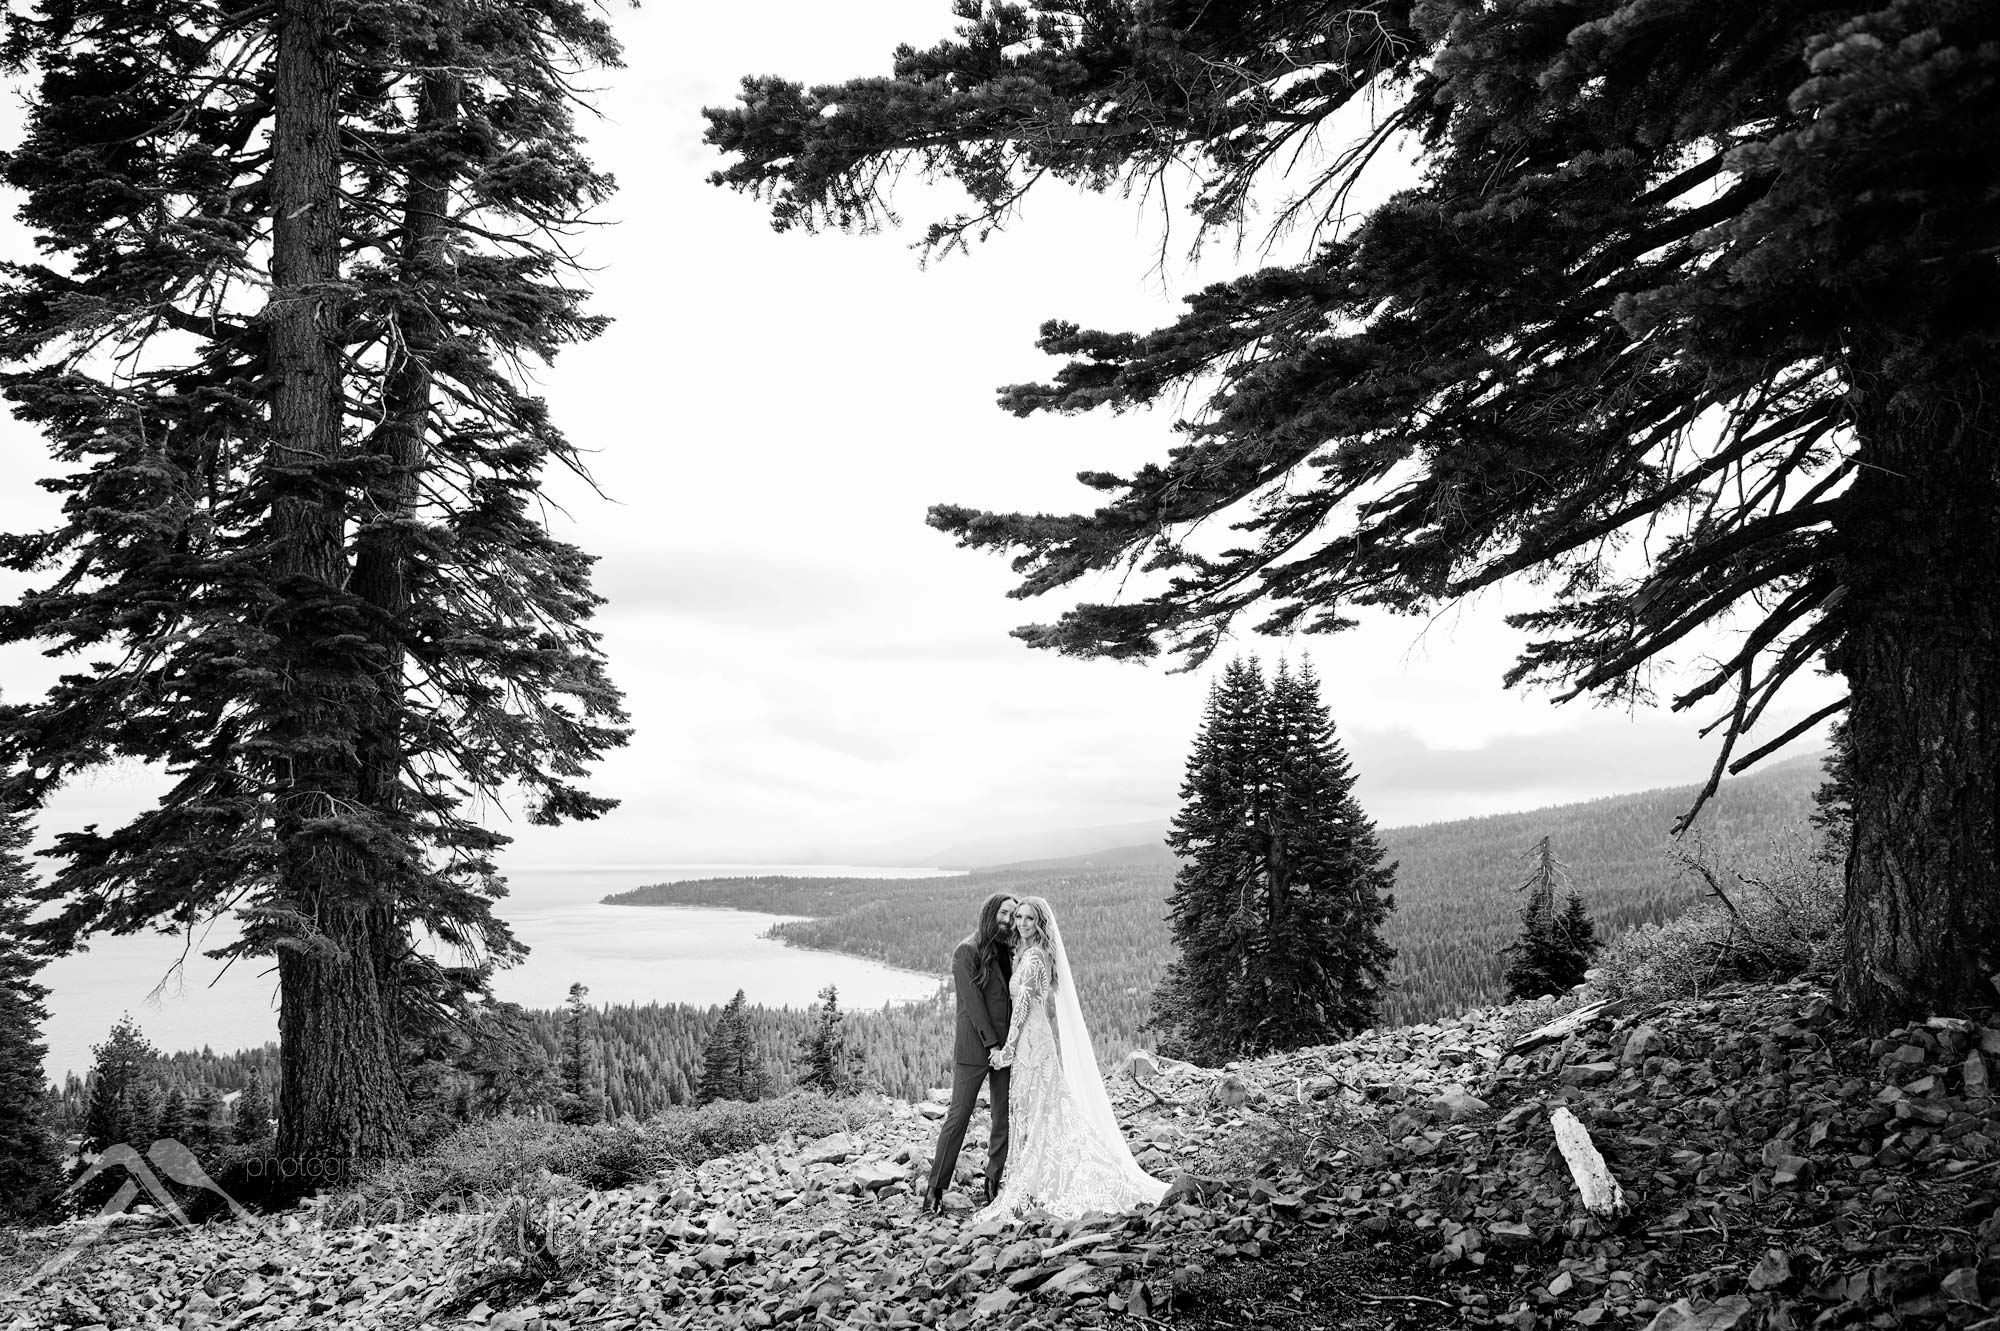 Lake Tahoe wedding photography, bride and groom portrait overlooking the lake, Photography by Monique